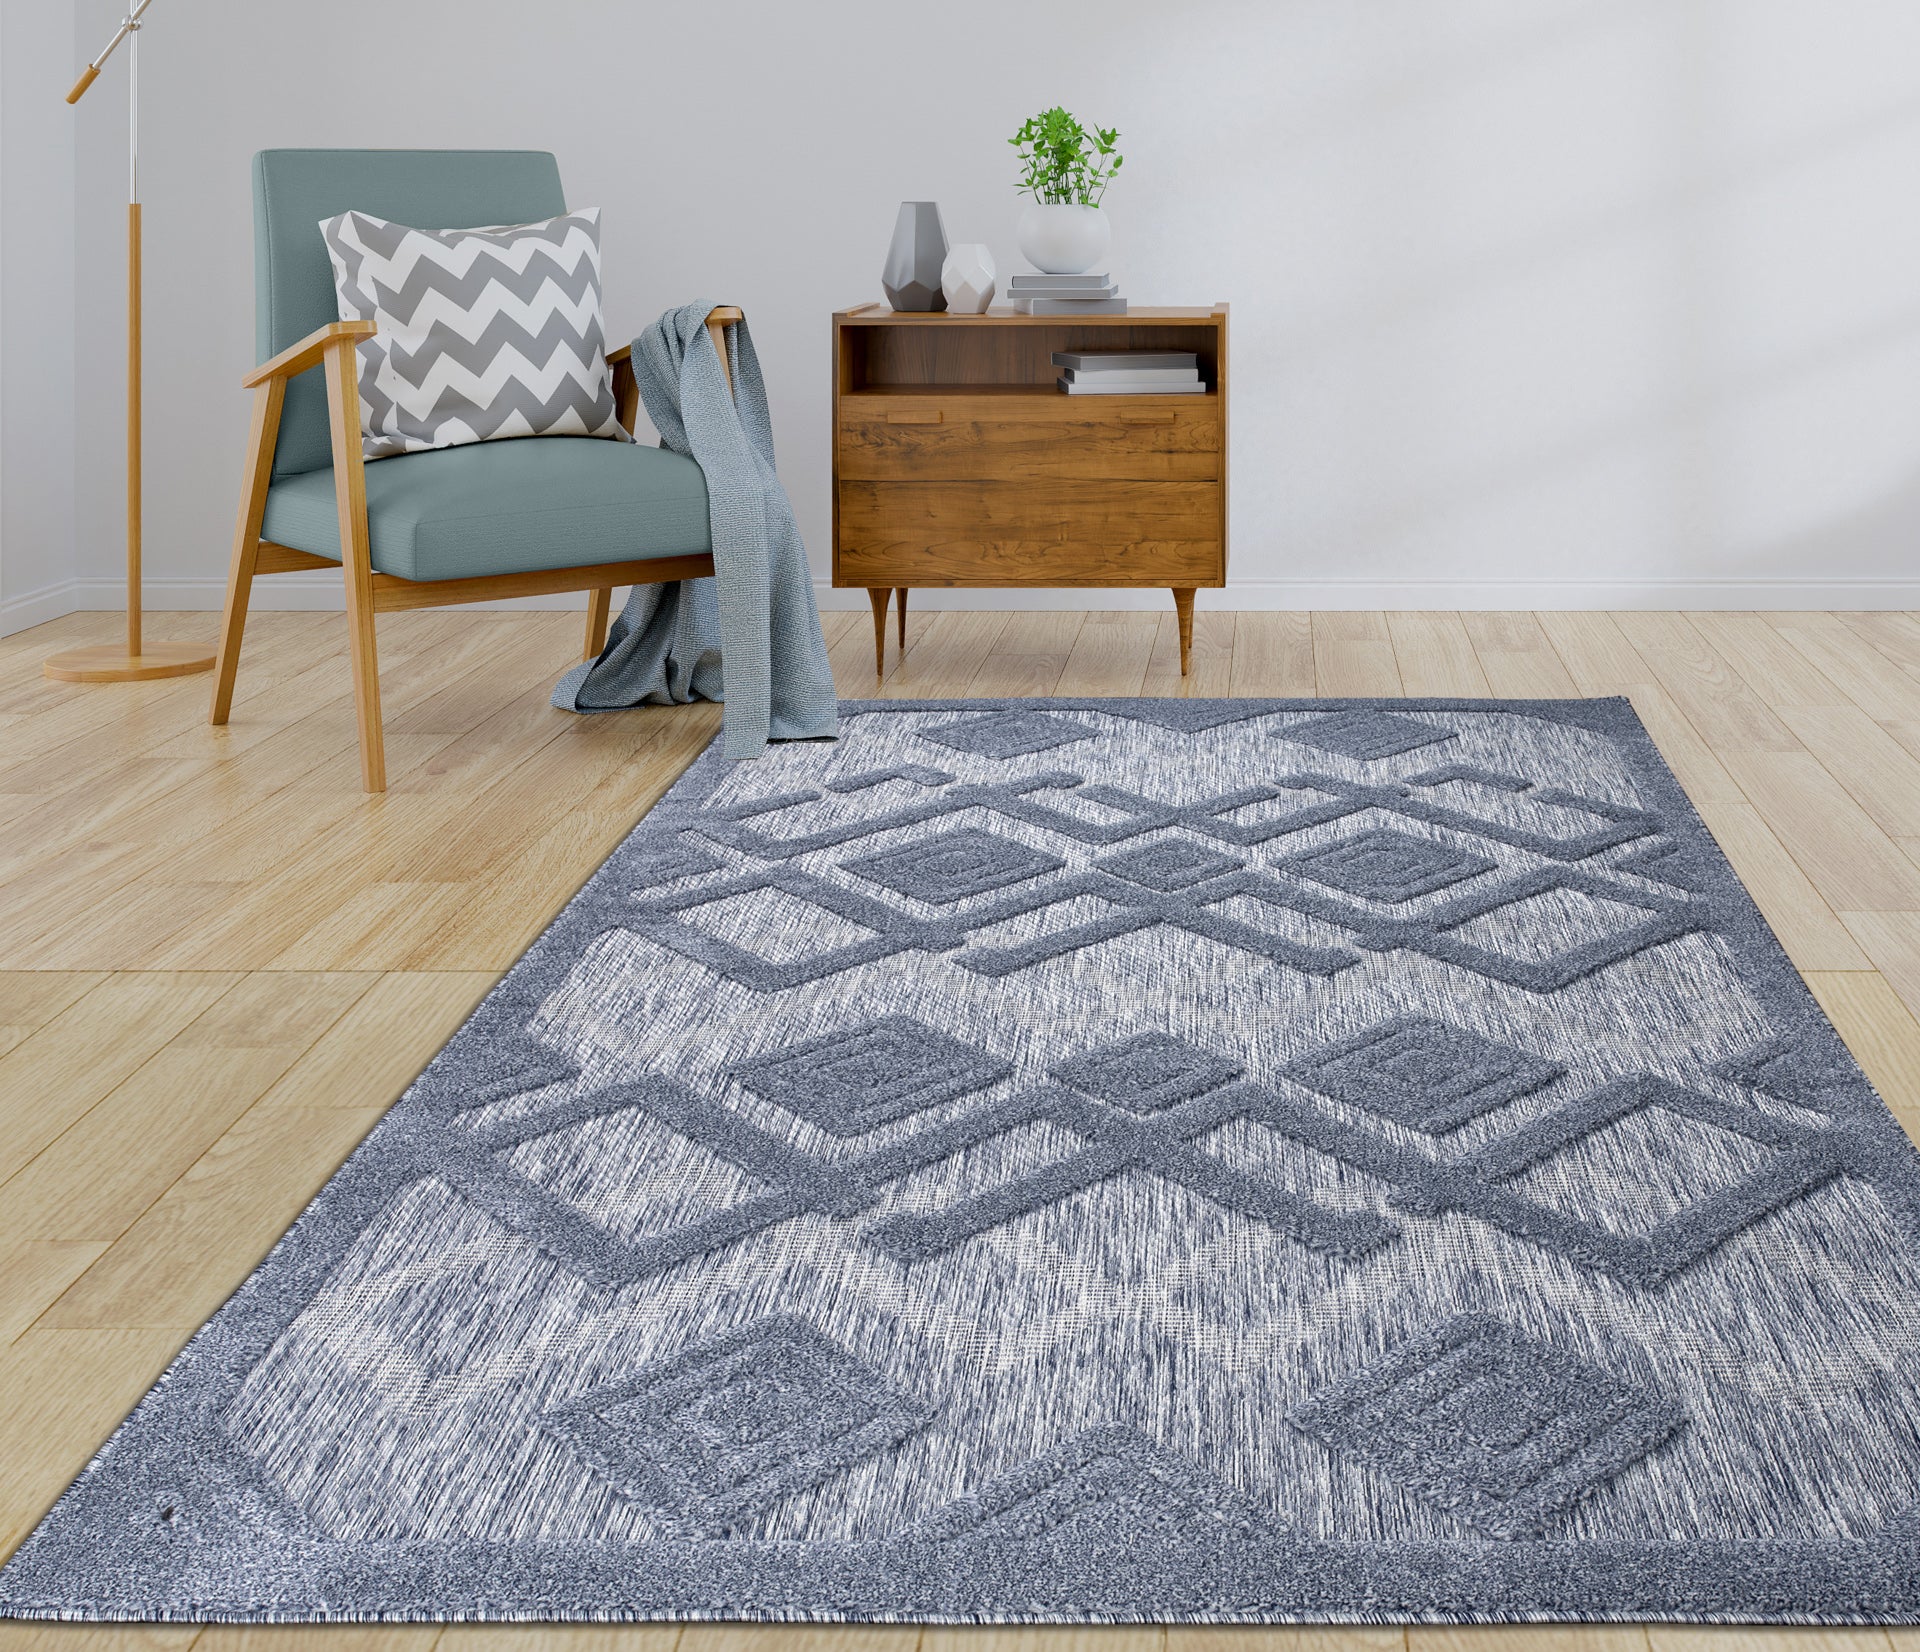 geometric modern minimalist contemporary outdoor indoor area rug carpet for patio porch dining area balcony living room bedroom 5x7, 5x8 ft Contemporary, Living Room Carpet, Bedroom, Home Office